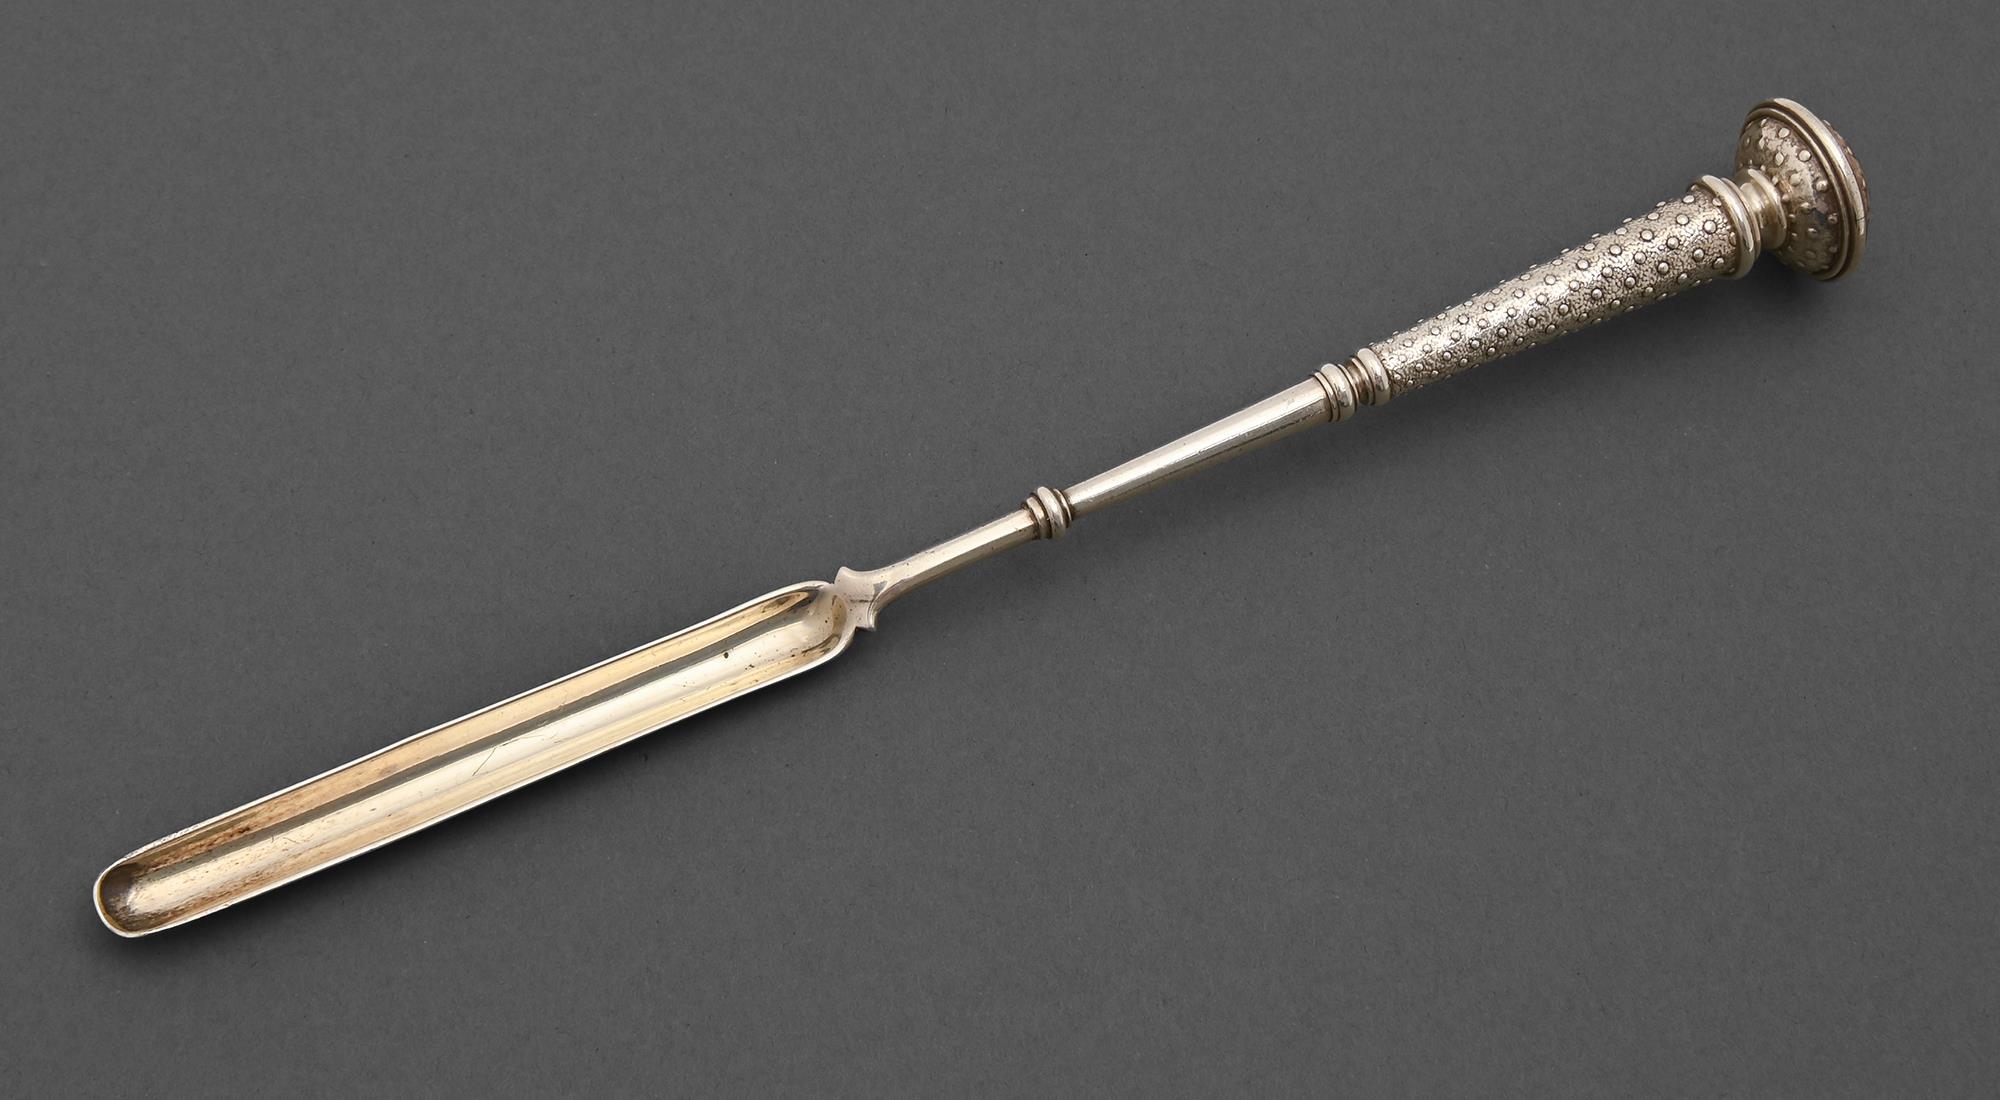 A North American silver marrow scoop, late 19th c, 25.5cm l, by Ball, Black & Co, maker’s mark and